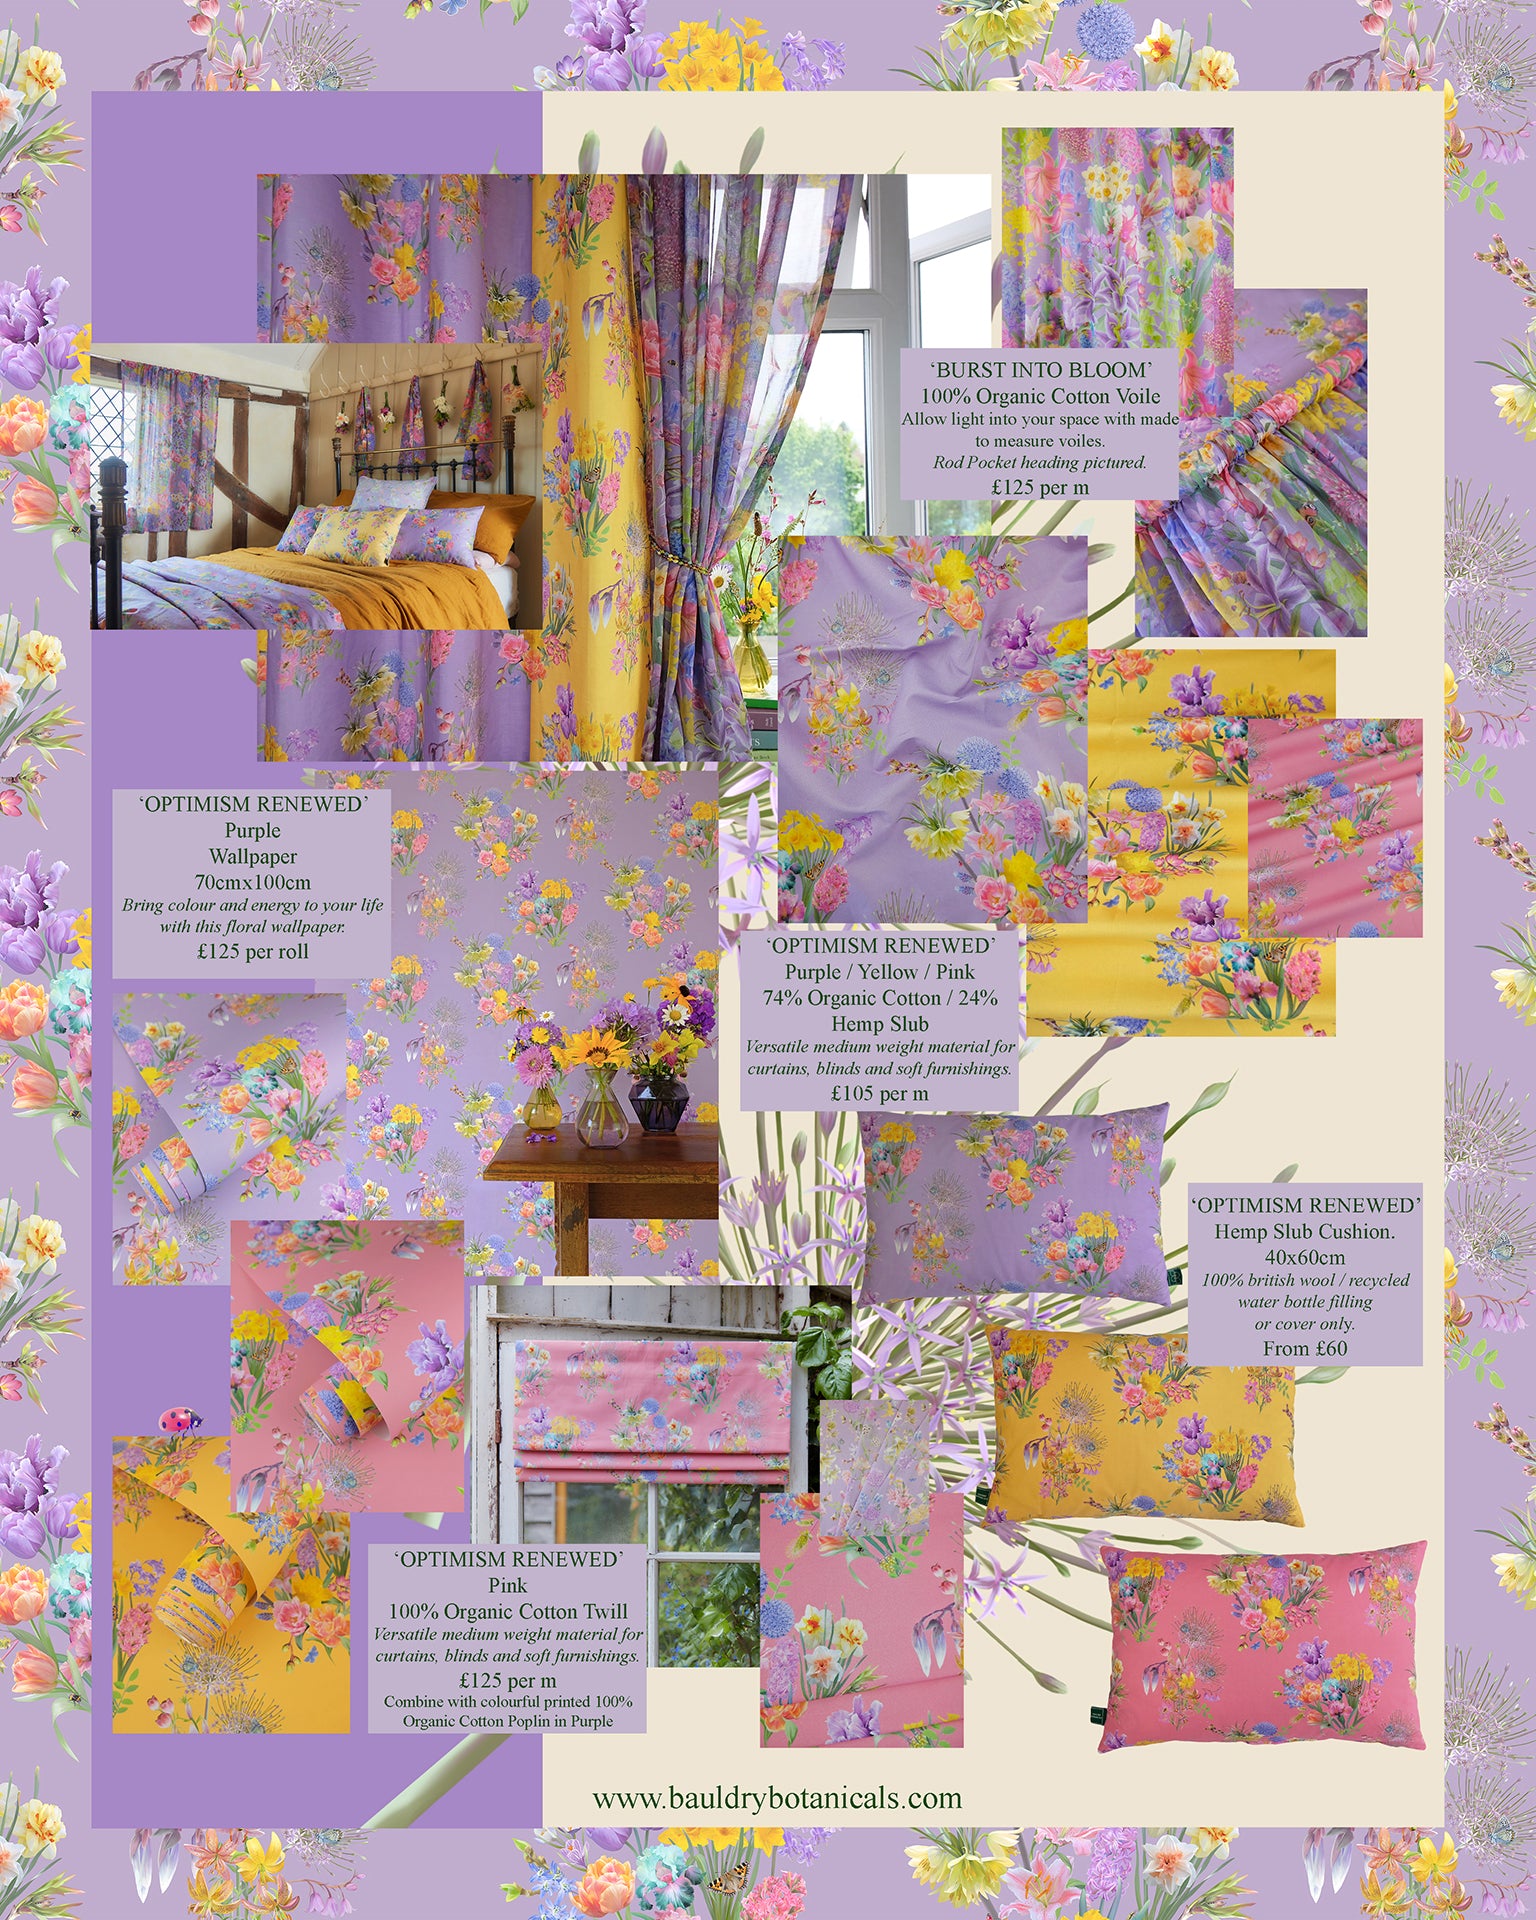 design and create your perfect home with optimism renewed in purple pink and yellow including cushions, wallpapers and fabrics